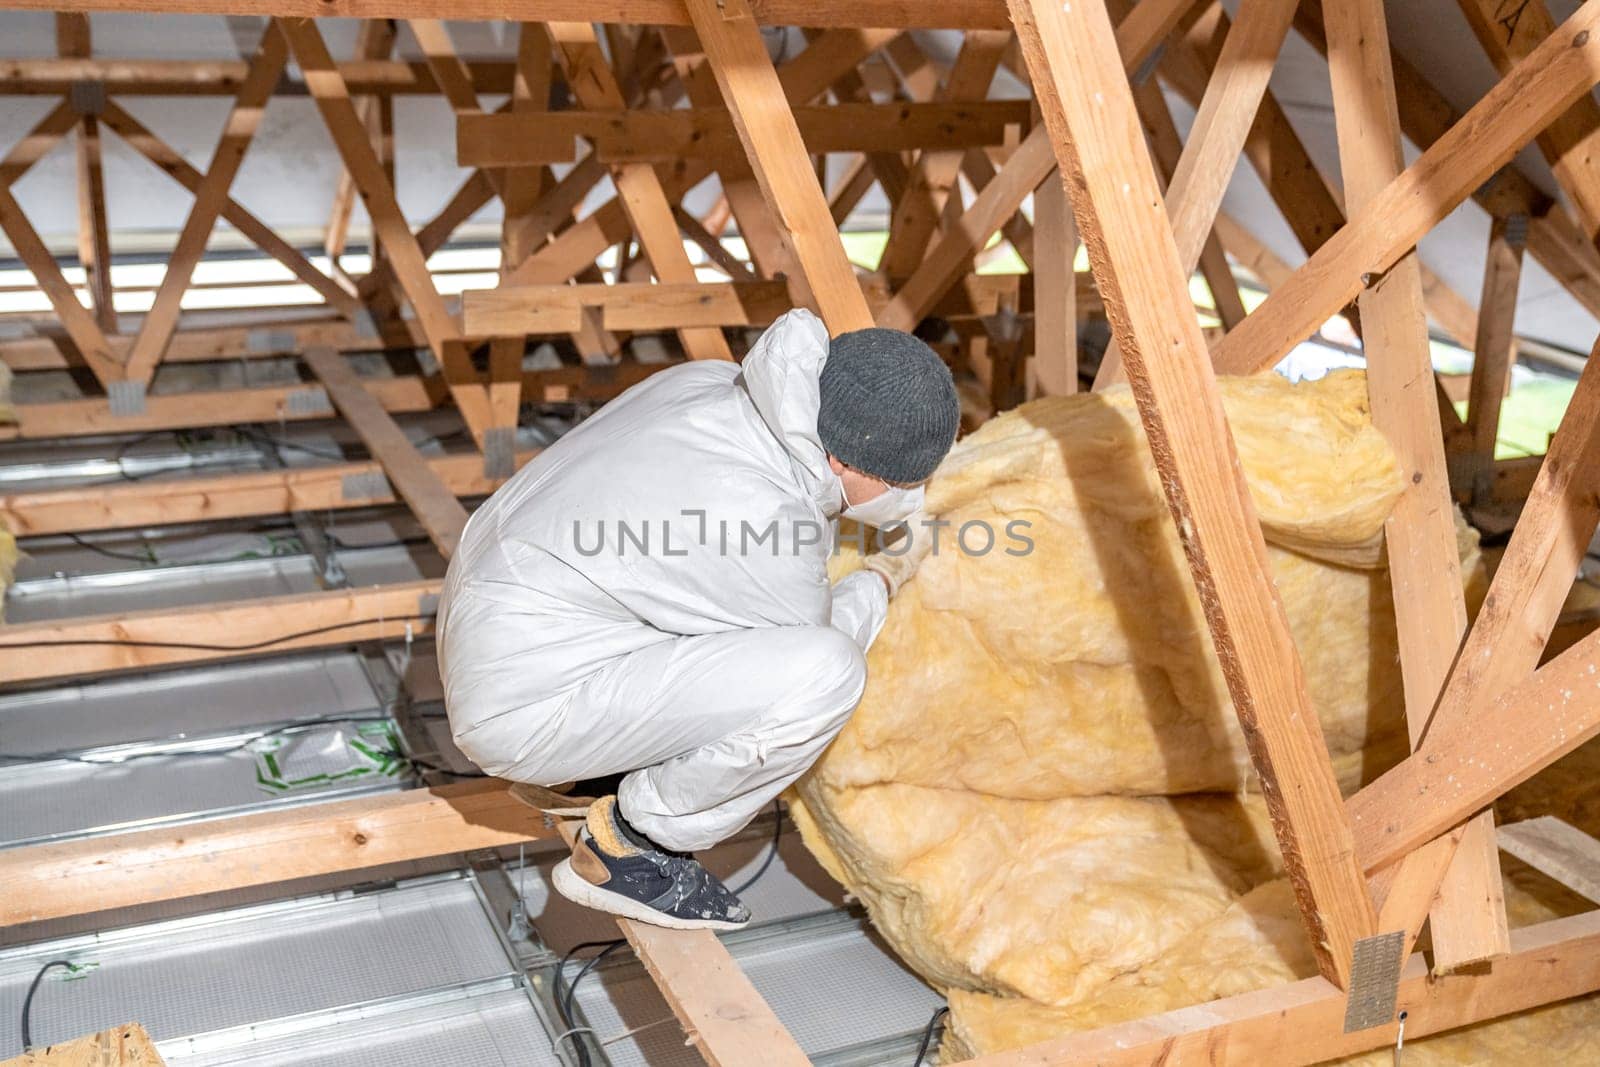 thermal insulation of roof spaces with glass wool by Edophoto